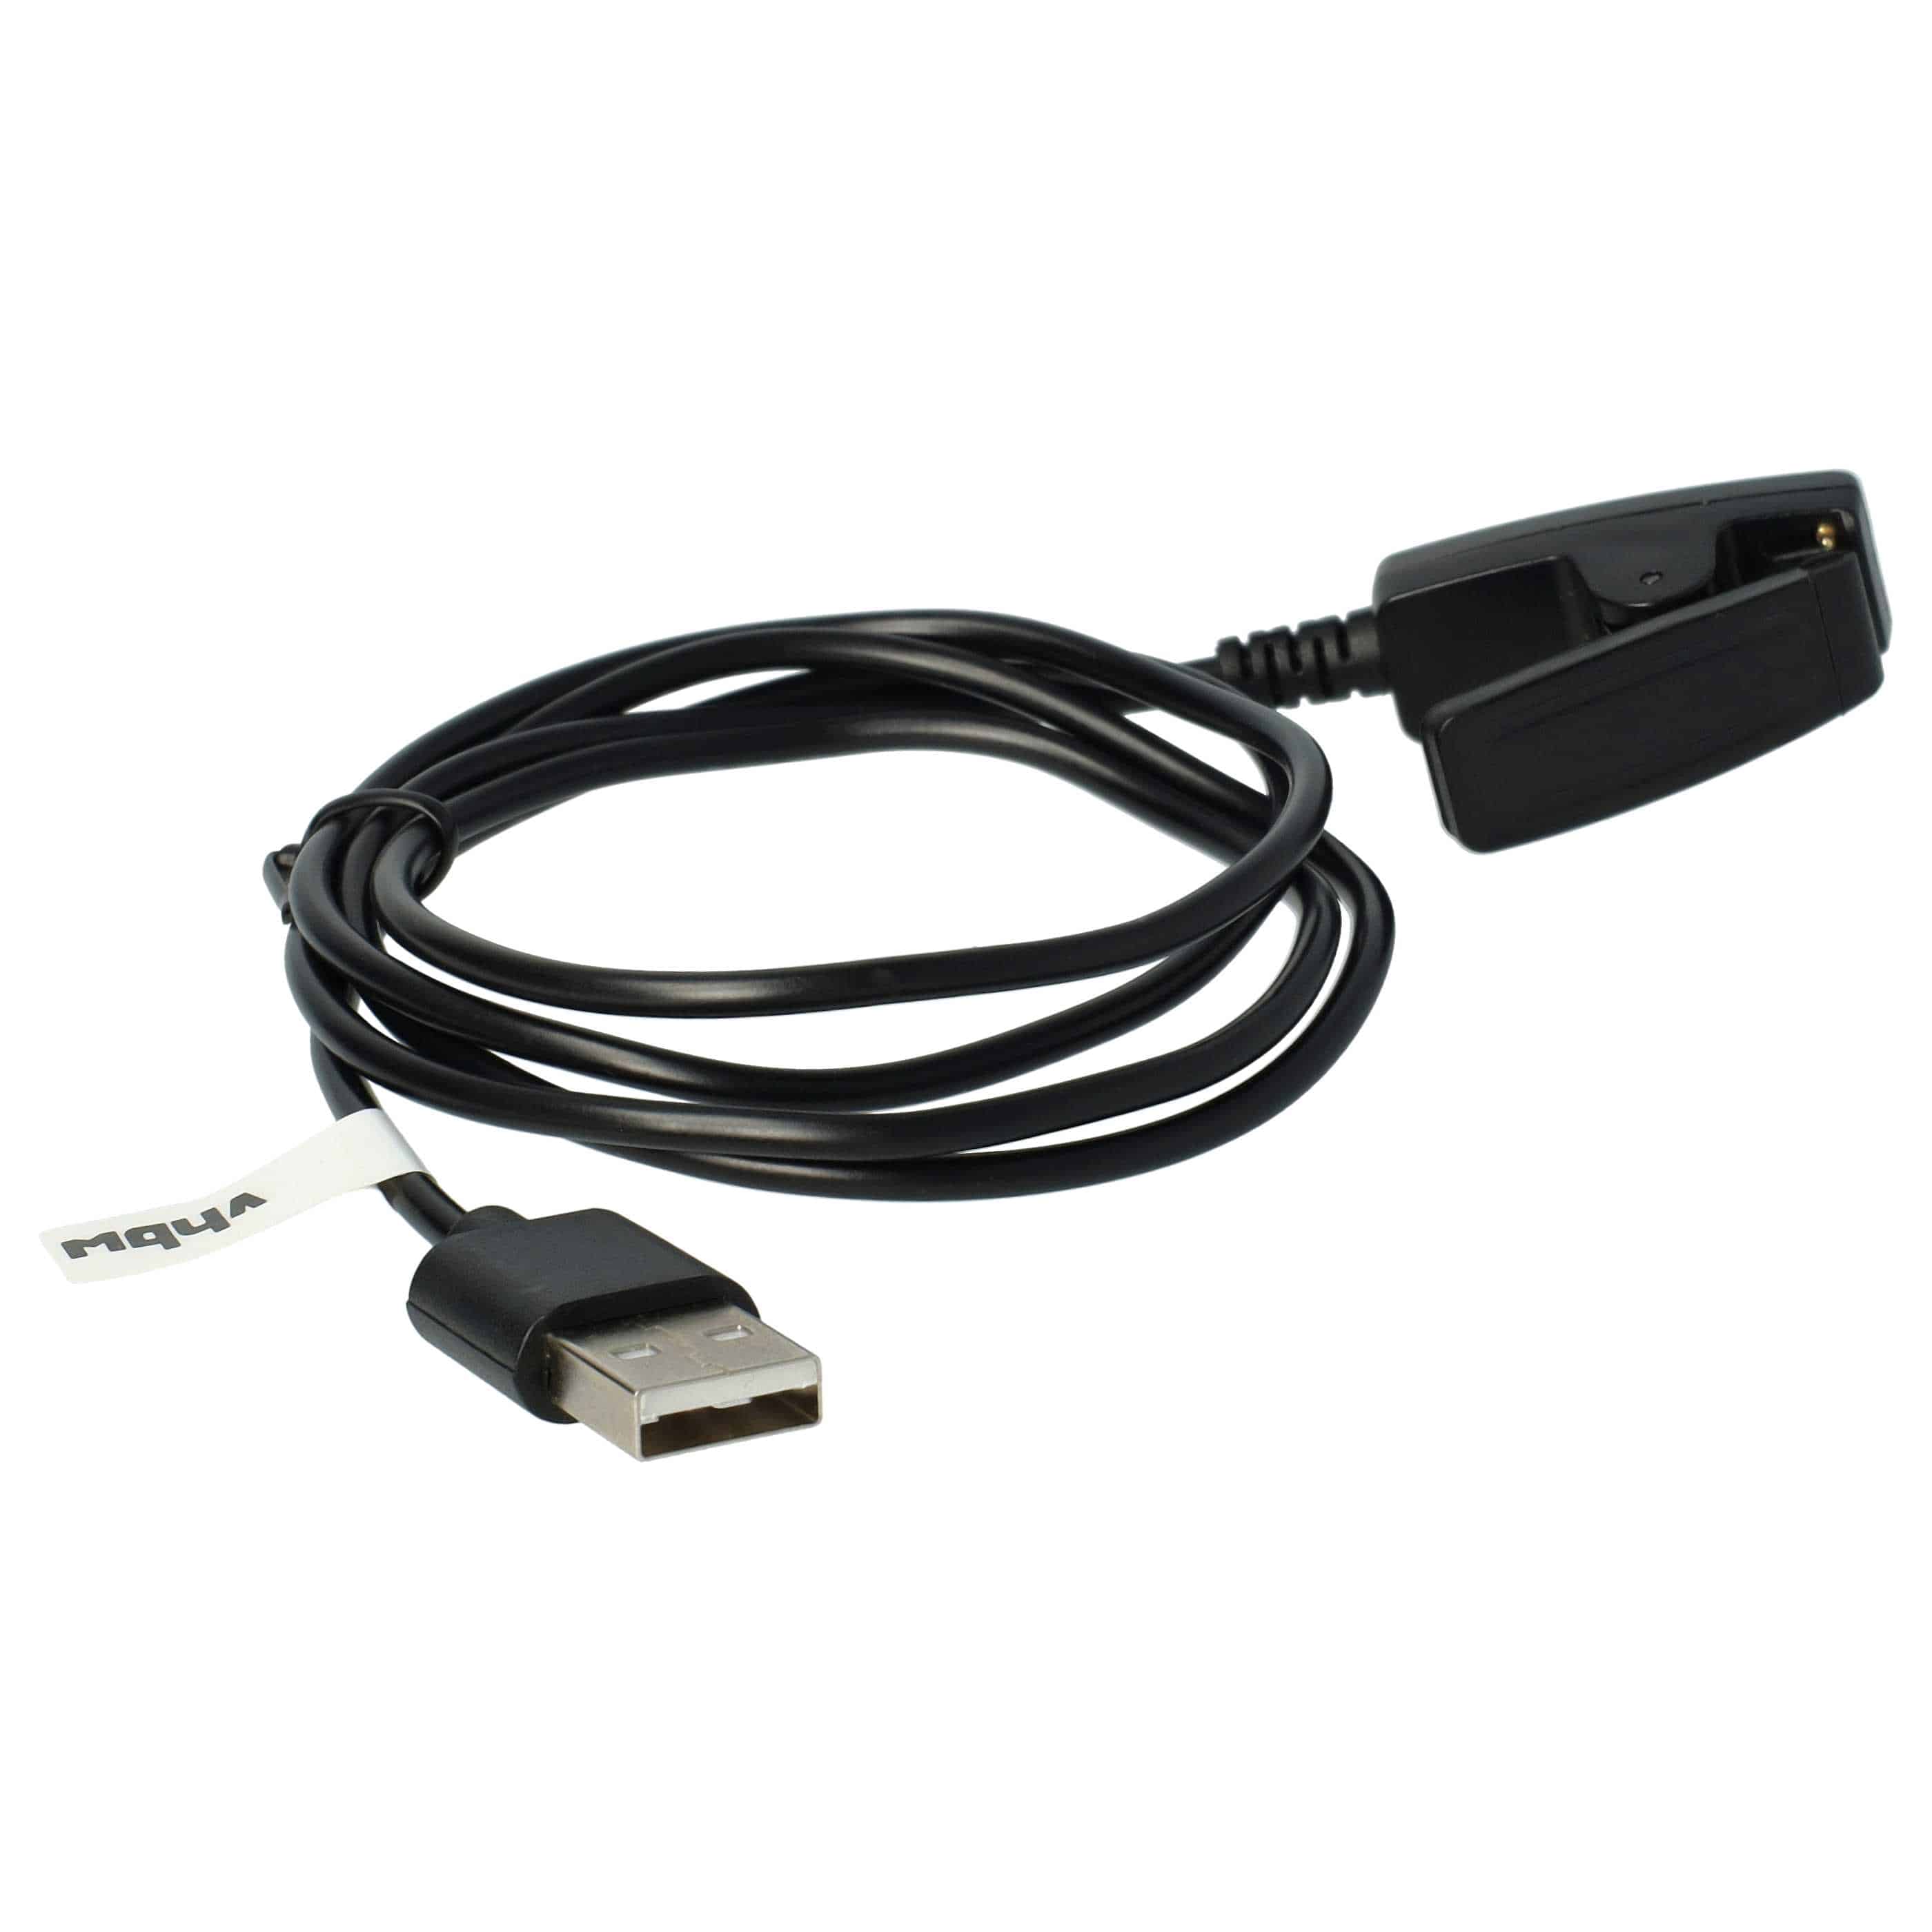 Charging Cable replaces Garmin 010-11029-19 for Garmin Fitness Tracker - Cable, 100cm, black